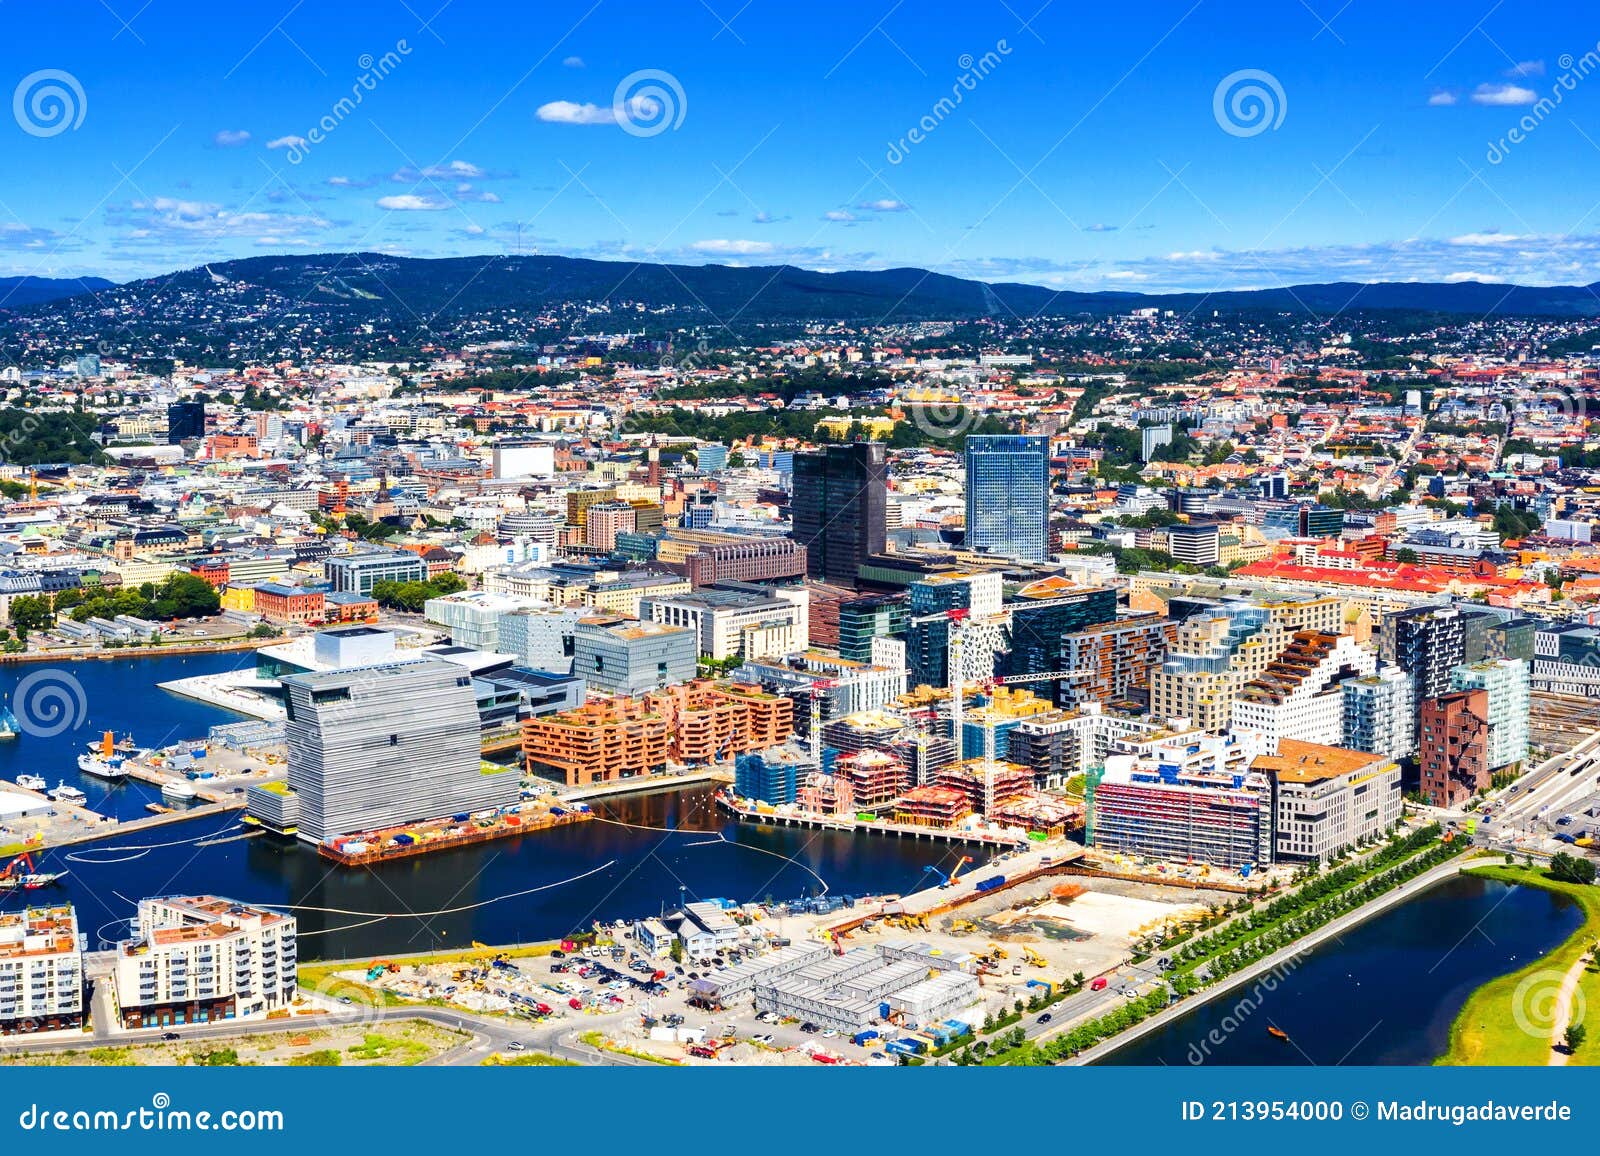 aerial view of sentrum area of oslo, norway, with barcode buildings and the river akerselva